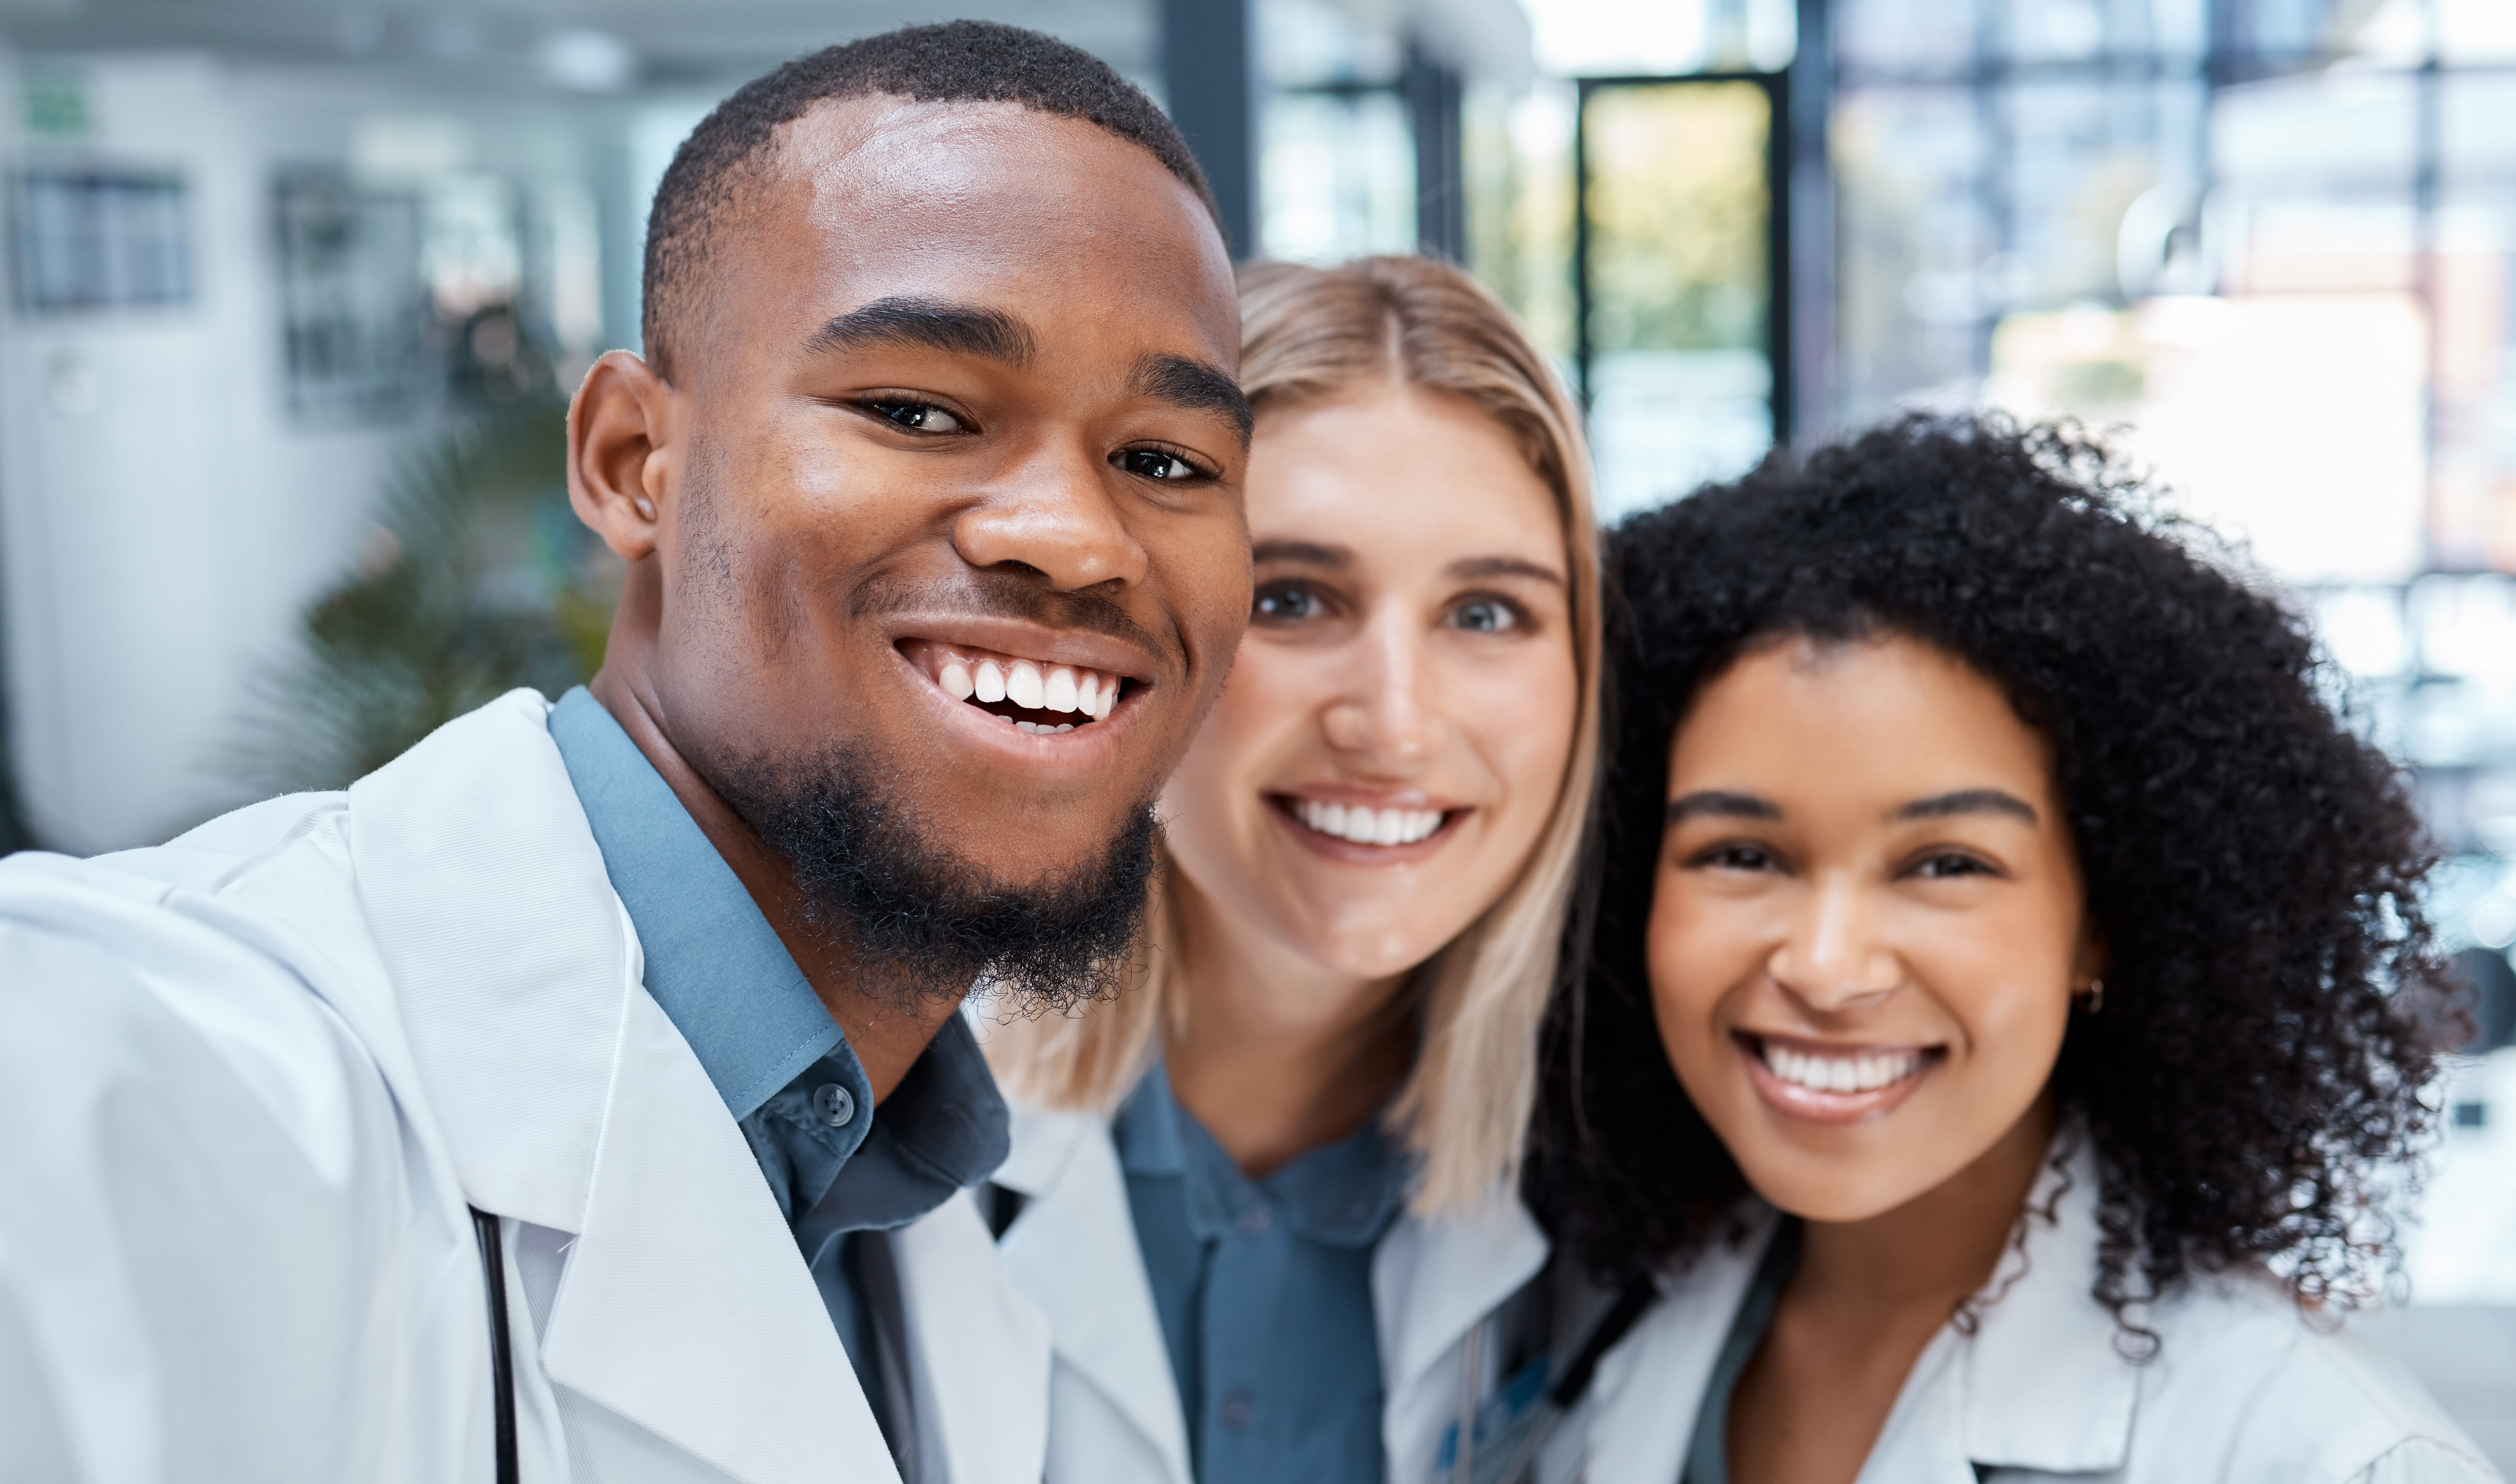 group of diverse medical students smiling at the camera